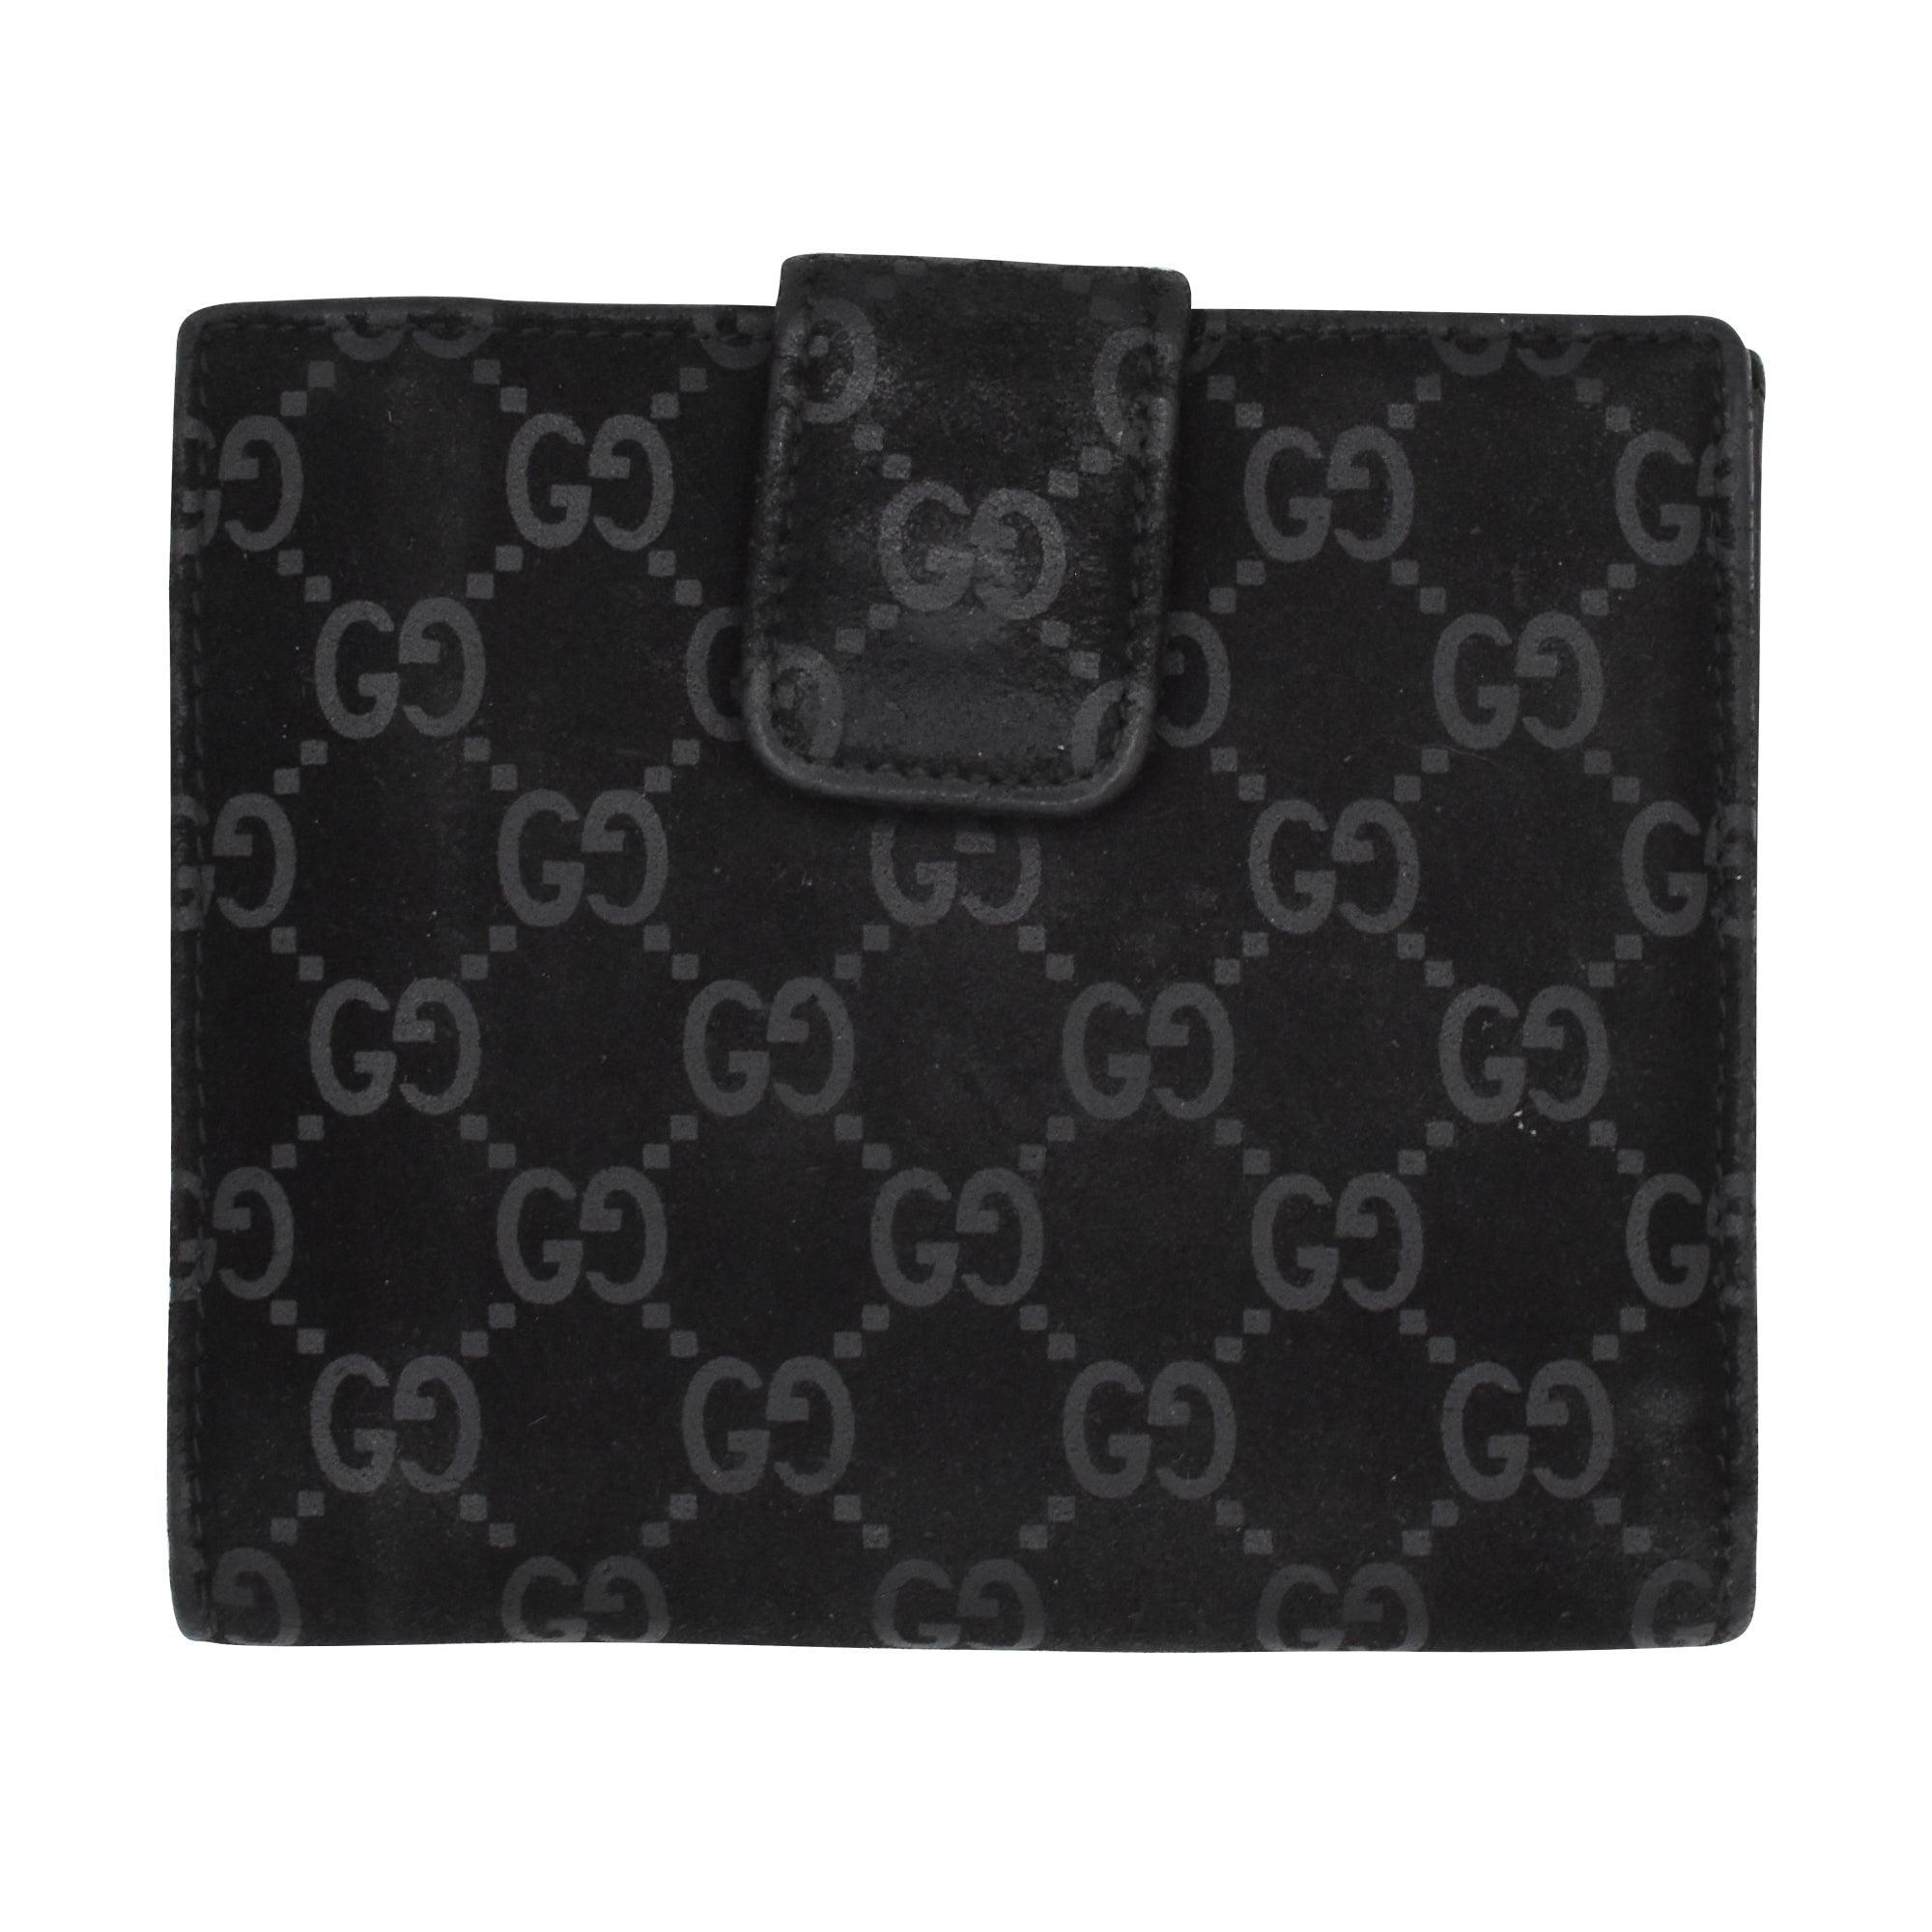 Gucci Snap Wallet - Fashionably Yours